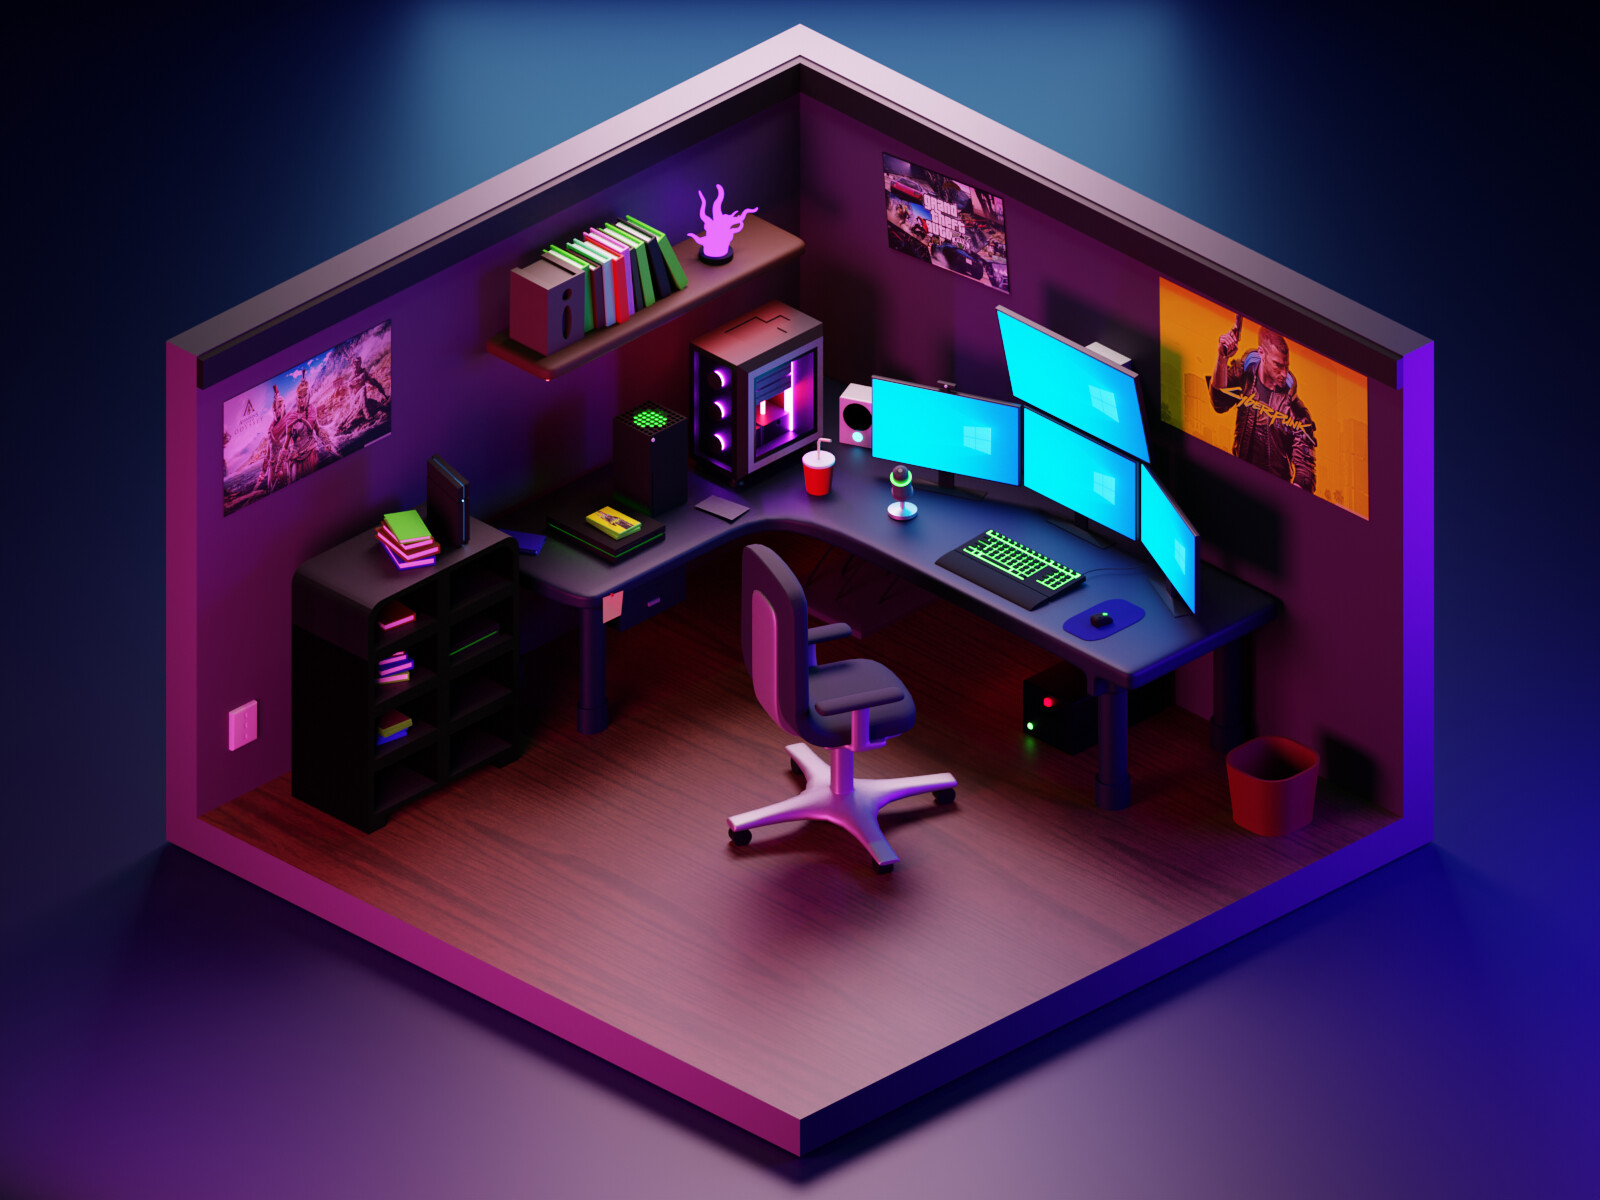 Gaming Room By Pathum Shehan On Dribbble Feel free to share games wallpapers and background images with your friends. gaming room by pathum shehan on dribbble